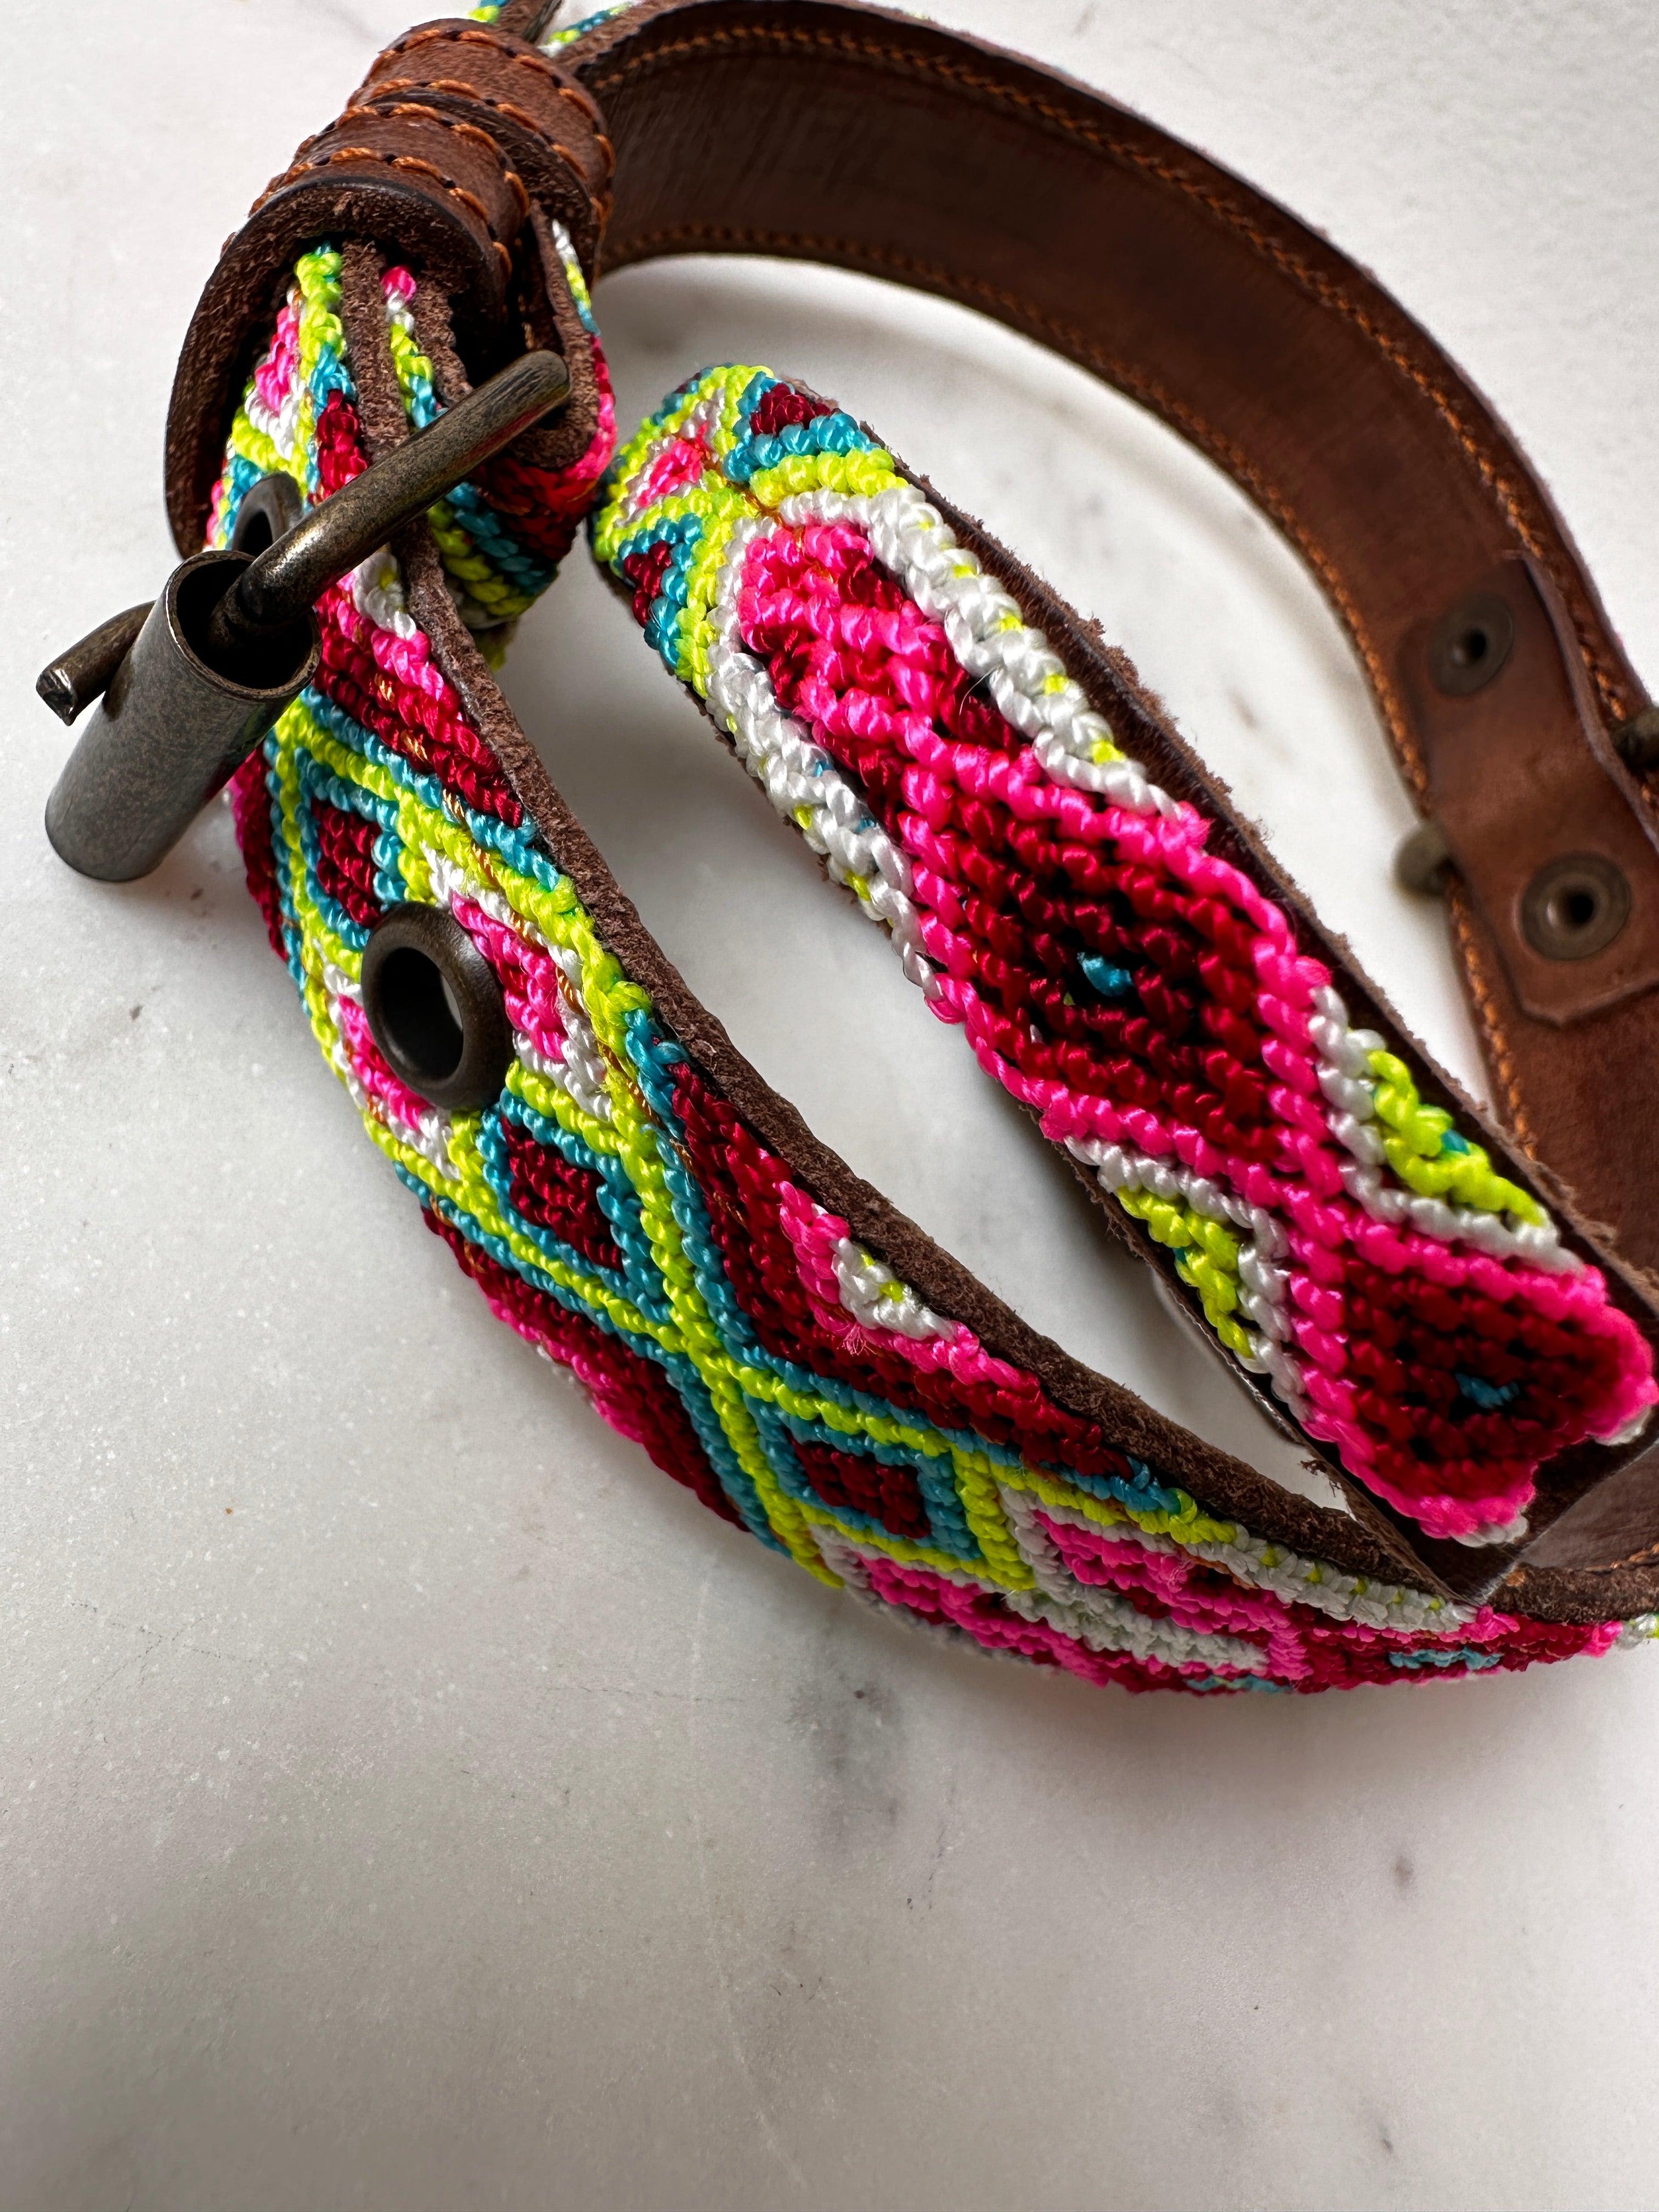 Future Nomads Homewares One Size Huichol Fully Embroidered Dog Collar M6